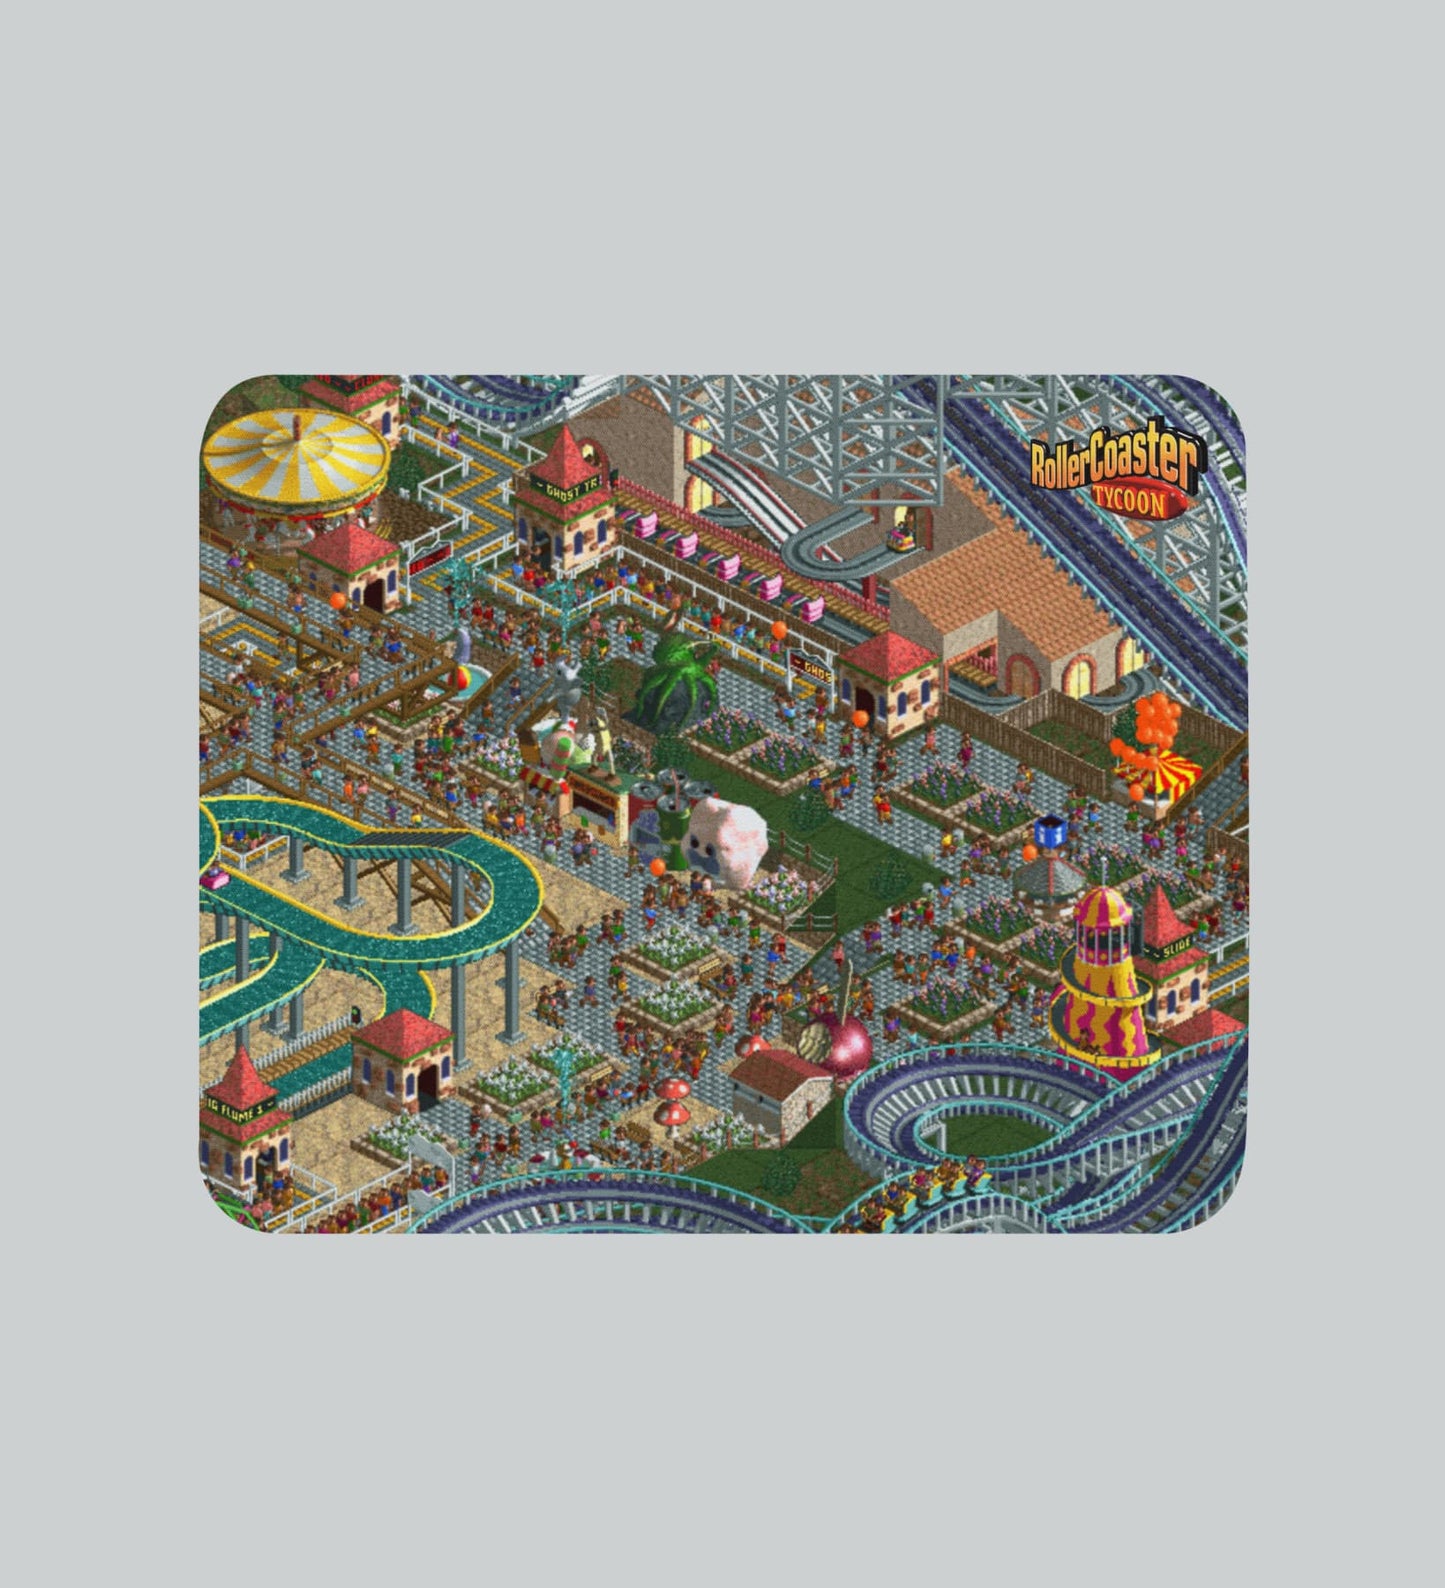 RCT 25th Anniversary Busy Park Art Mouse Pad